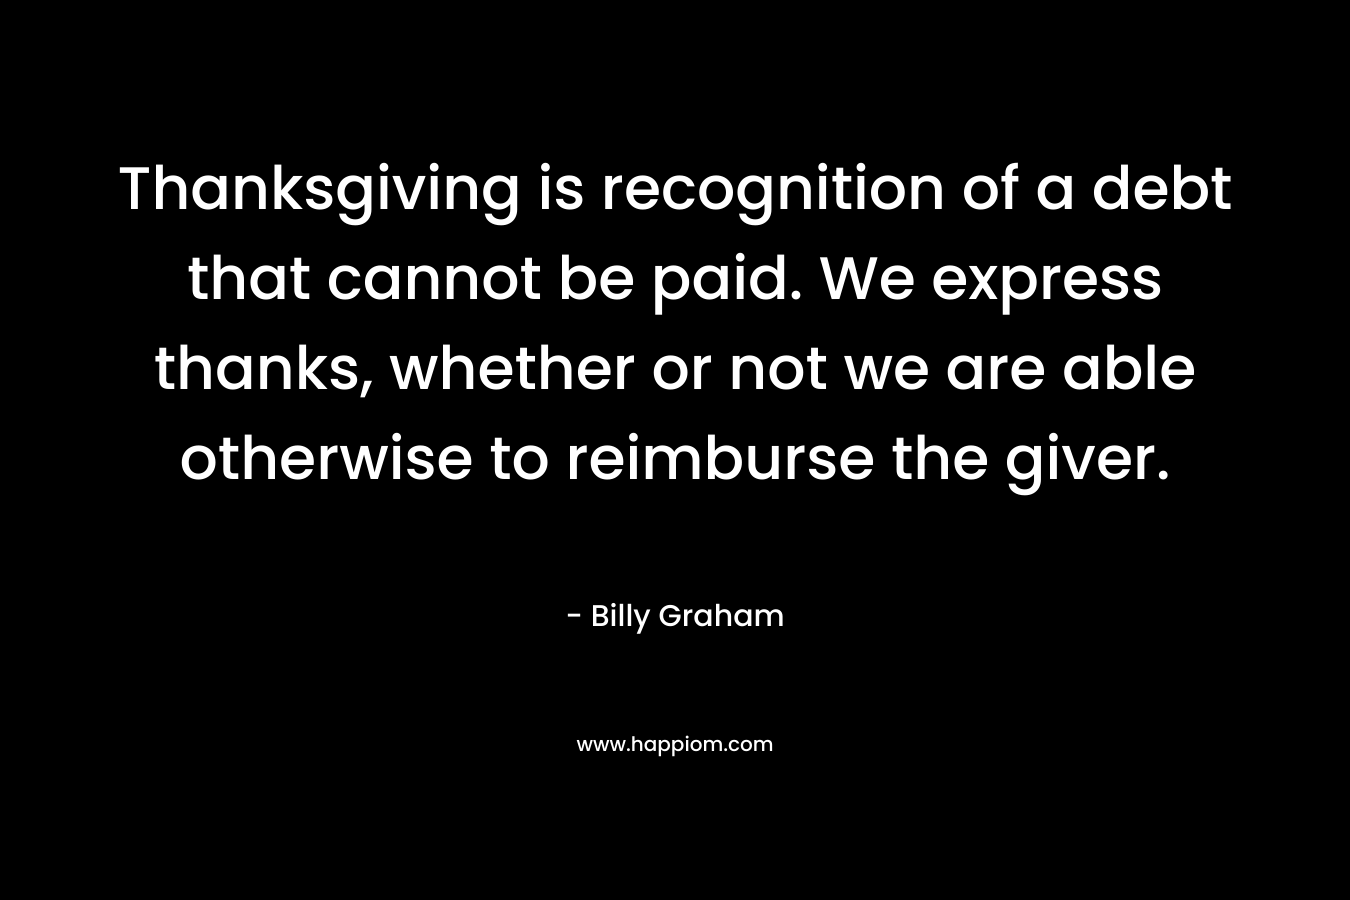 Thanksgiving is recognition of a debt that cannot be paid. We express thanks, whether or not we are able otherwise to reimburse the giver.